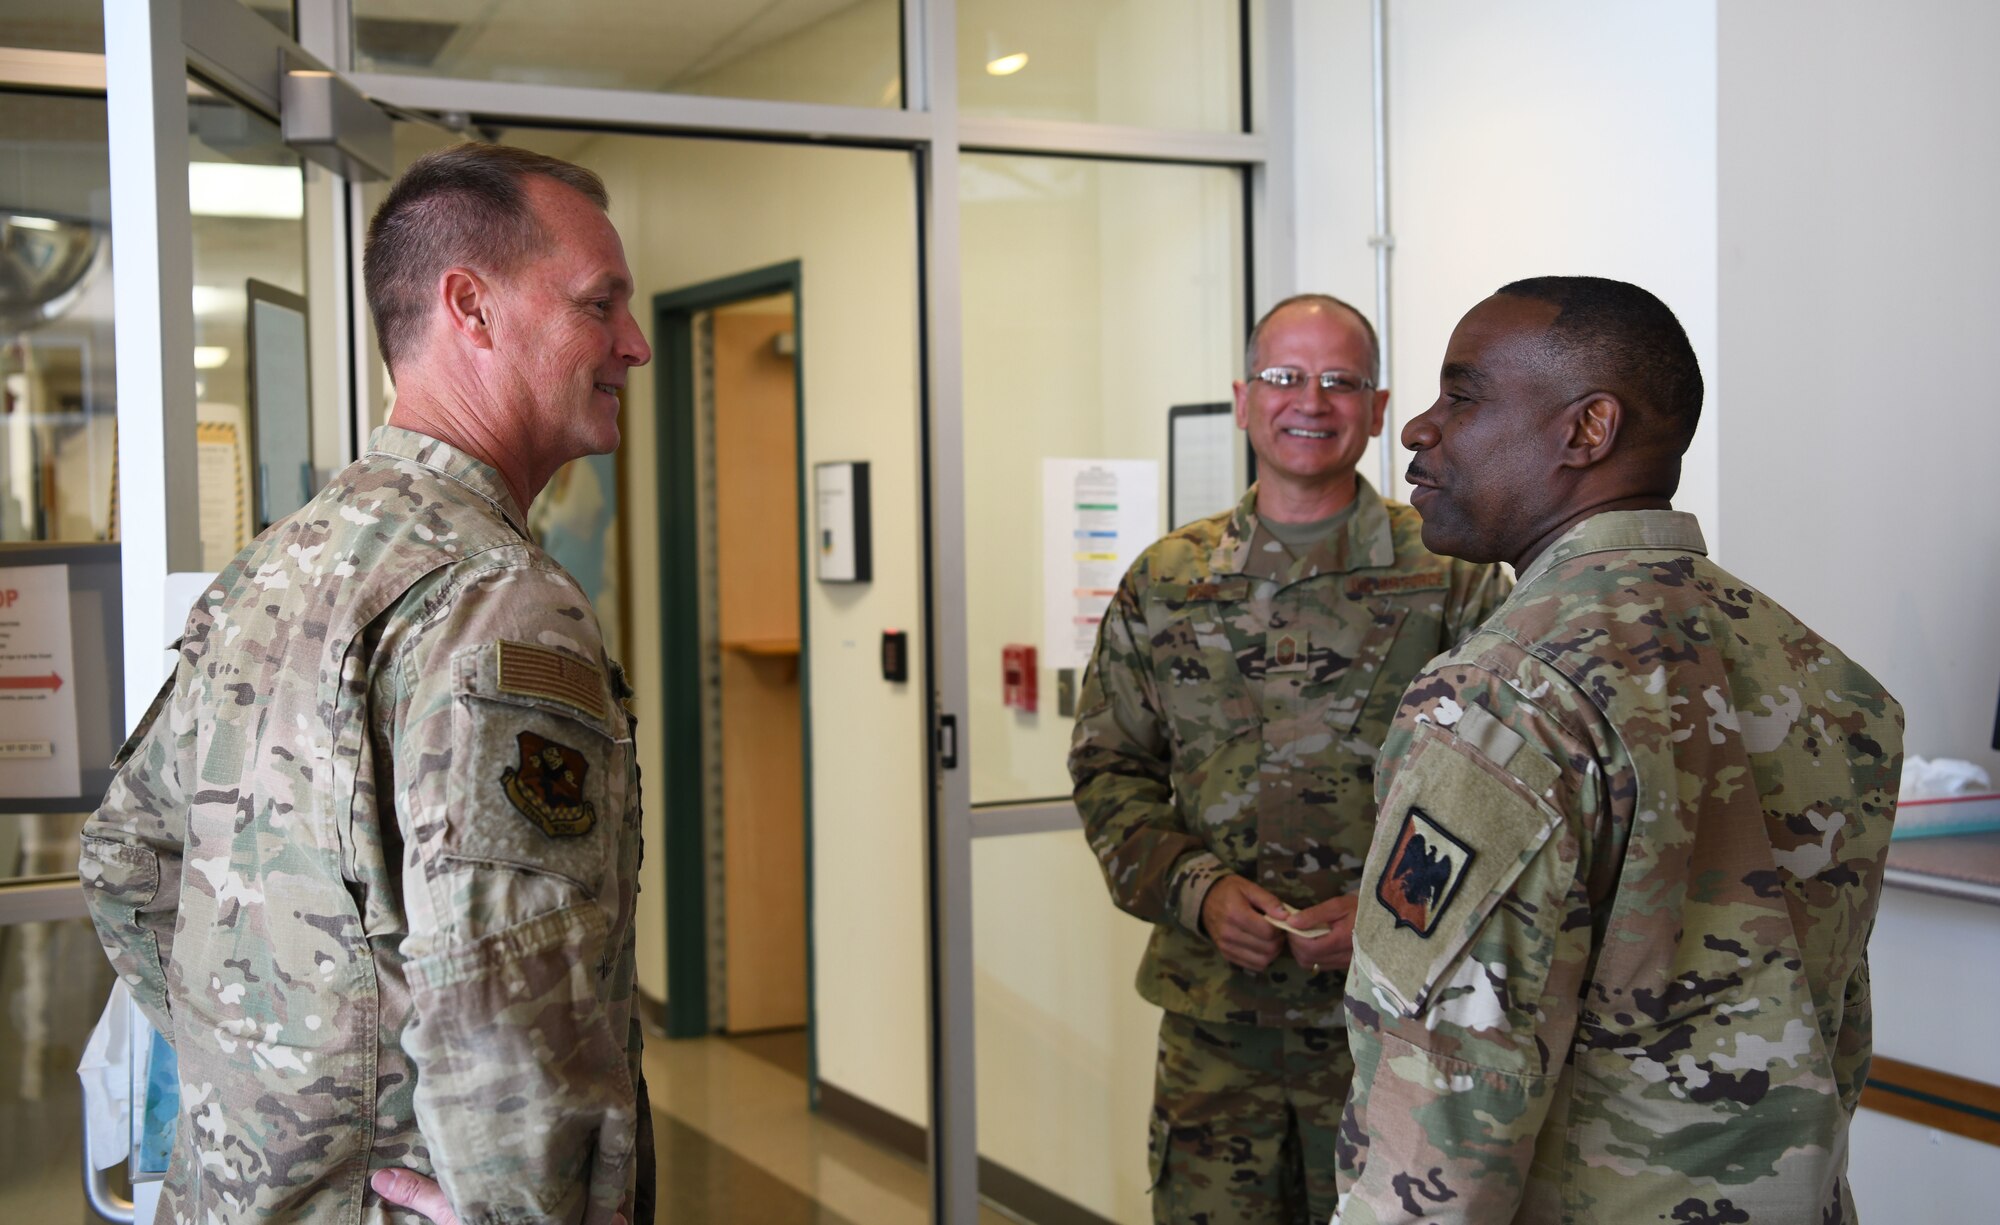 U.S. Air Force Chief Master Sgt. Maurice Williams, left, command chief, Air National Guard, speaks with Lt. Col. Robert Krooner, left, commander, 178th Medical Group, 178th Wing, Ohio National Guard, and Chief Master Sgt. Brian Wear, chief enlisted manager, 178th Medical group, , Oct. 15, 2022, in Springfield, Ohio. Krooner welcomed Williams to tour the medical group facilities and speak with some of the Airmen at work. (U.S. Air National Guard photo by Senior Airman Jillian Maynus)